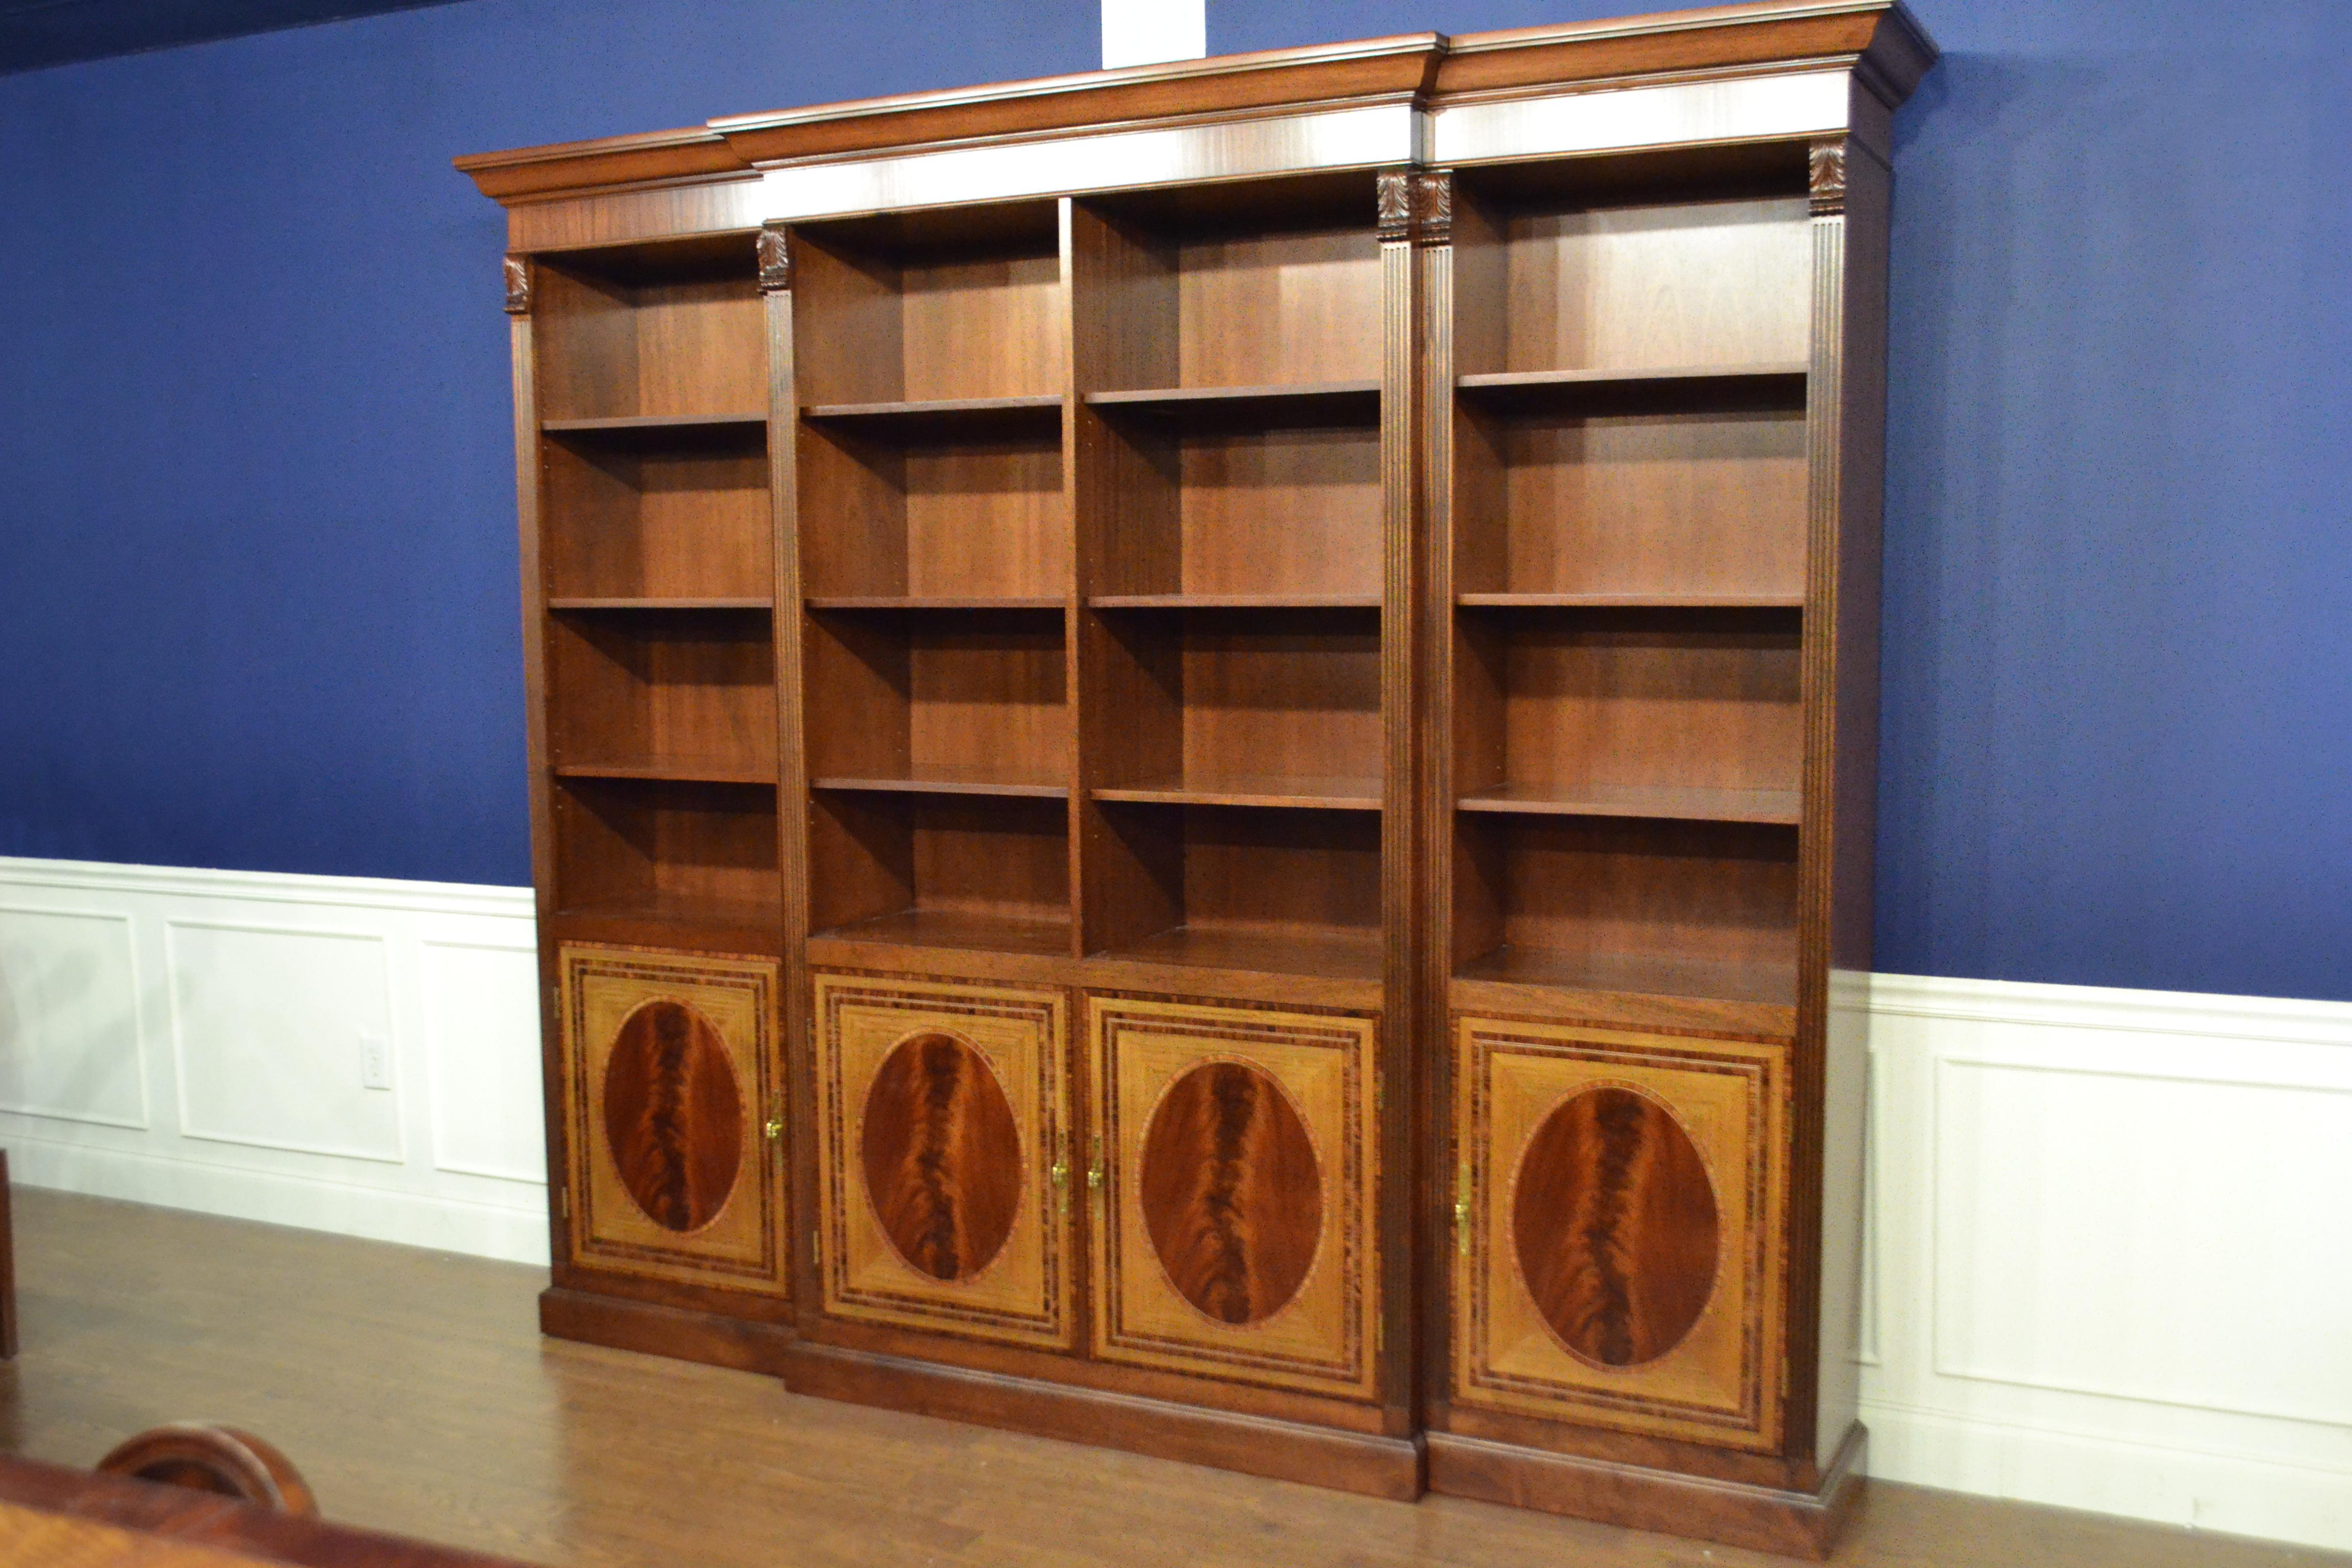 This is made-to-order traditional mahogany bookcase with four doors made in the Leighton Hall shop. It features four doors with swirly crotch mahogany fields and satinwood and santos rosewood borders. The corner posts are fluted with carvings at the